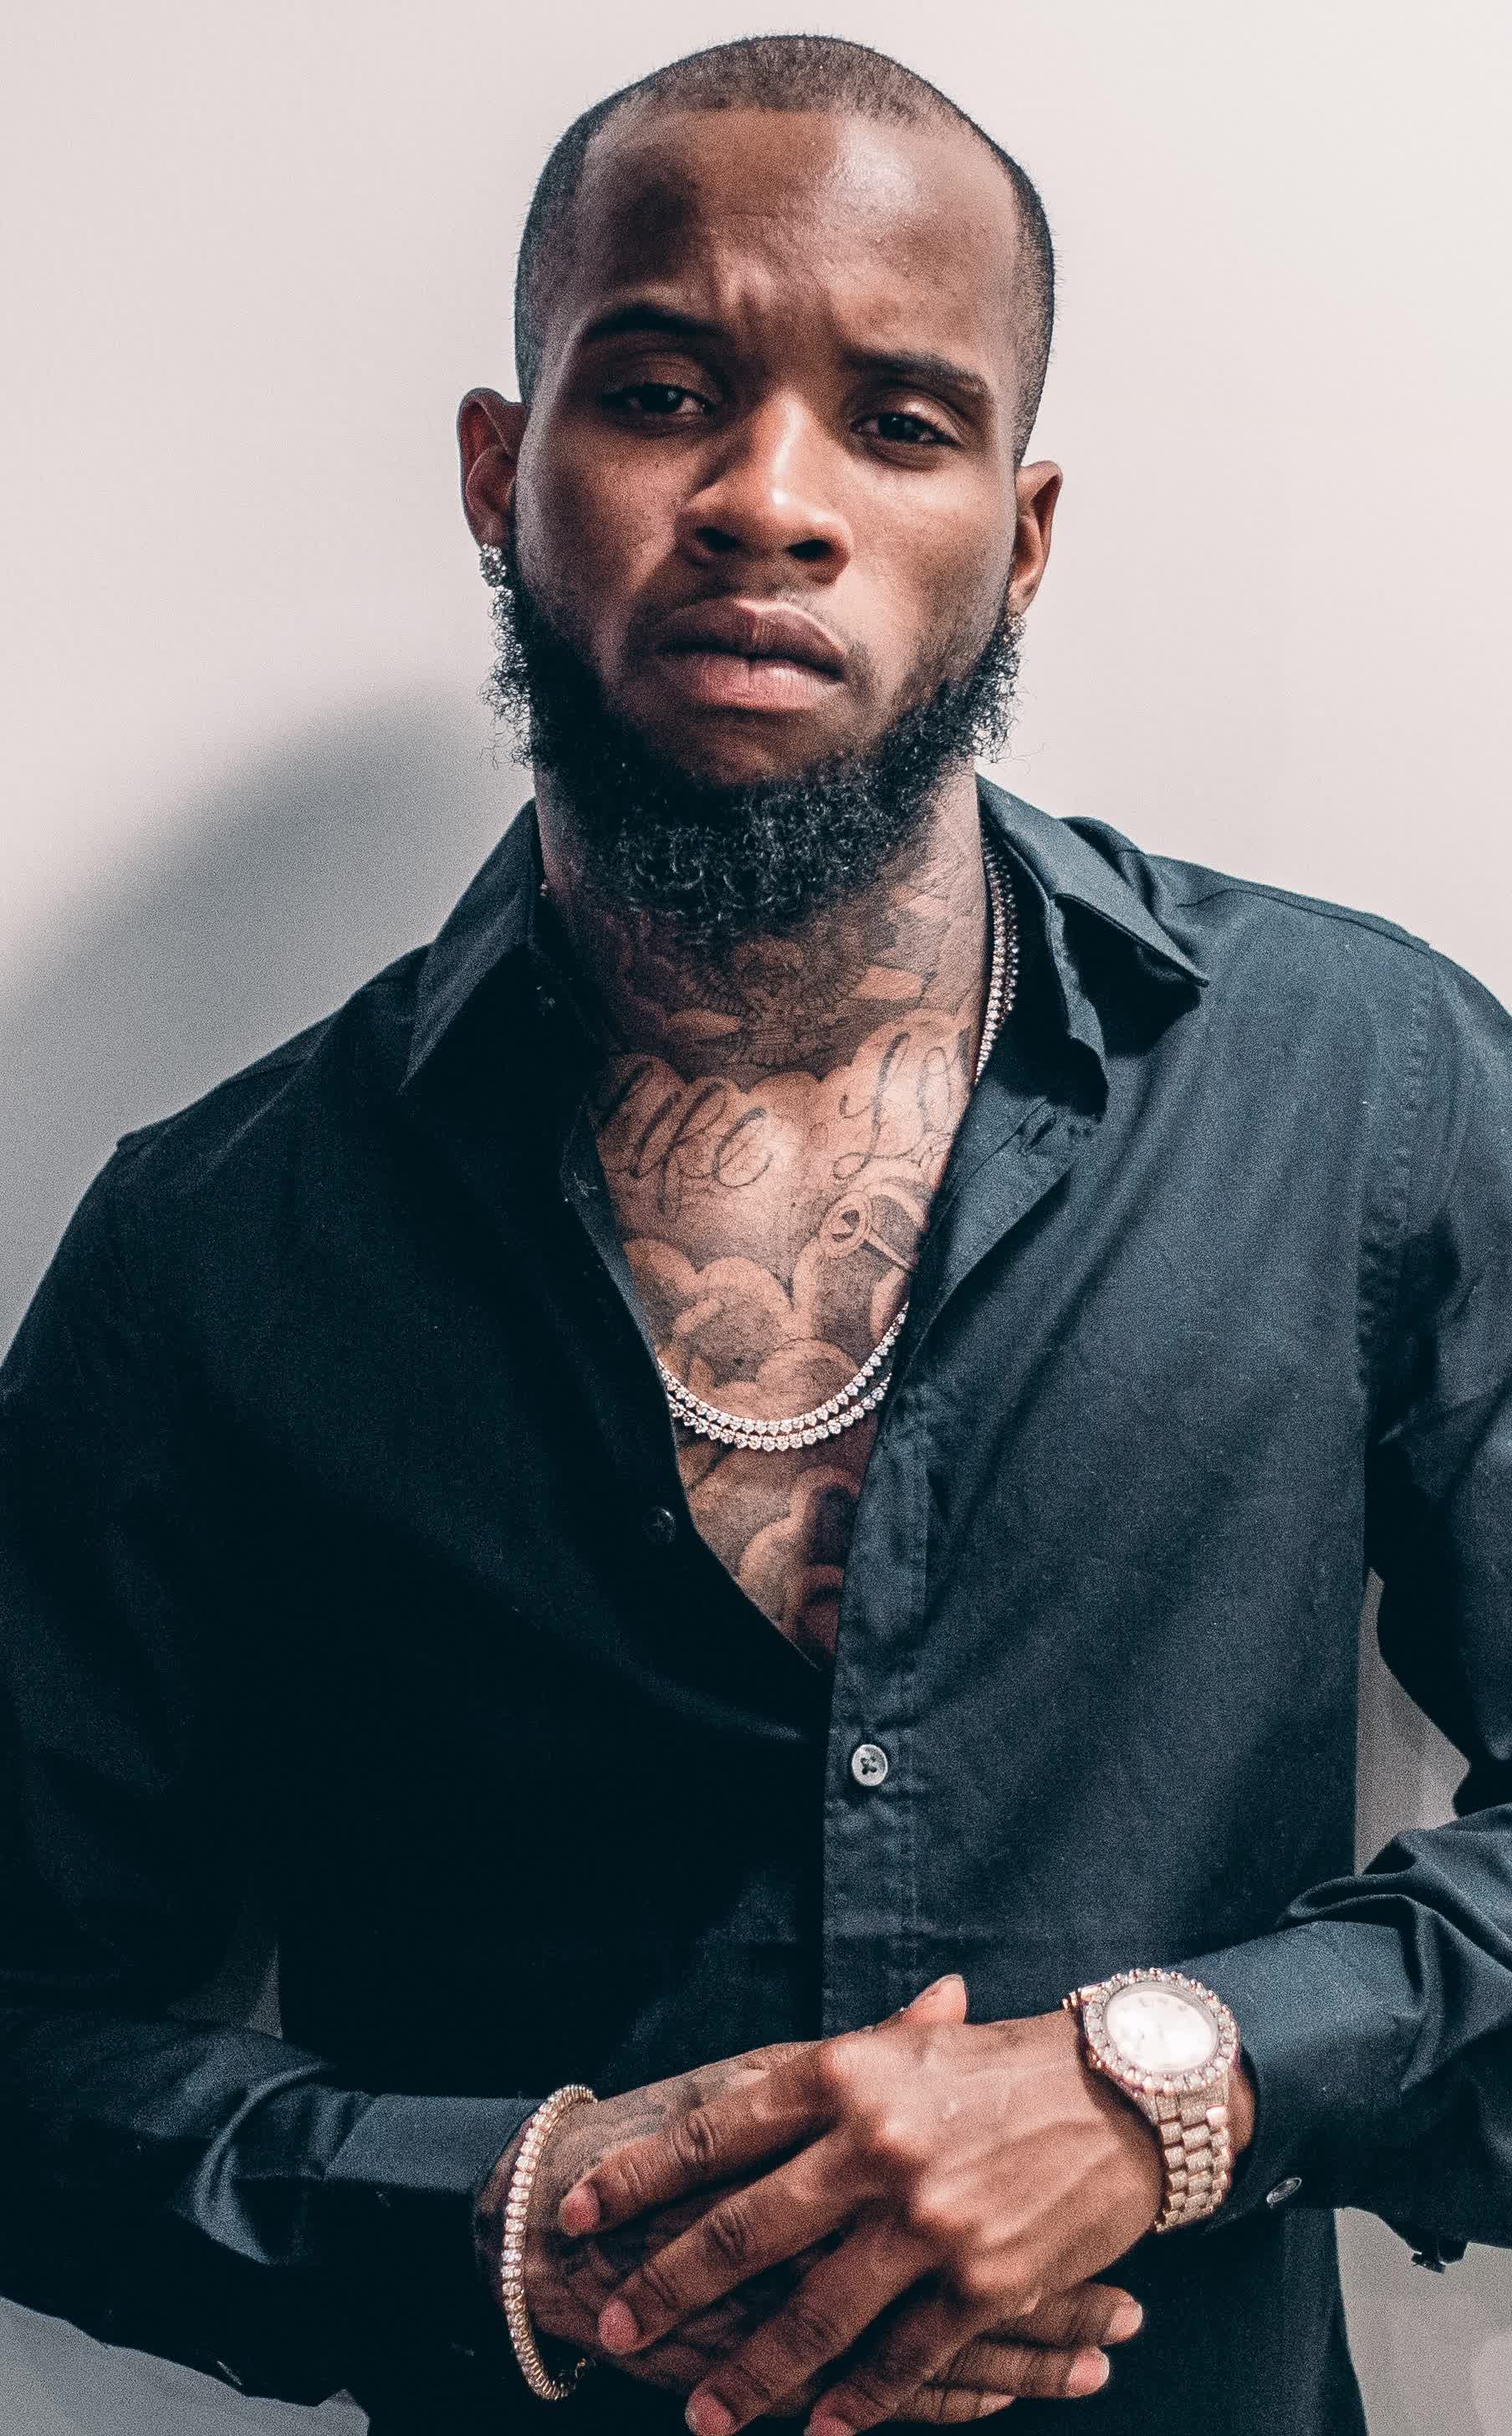 Tory Lanez - Bio, Age, Height, Weight, Net Worth, Facts and Family